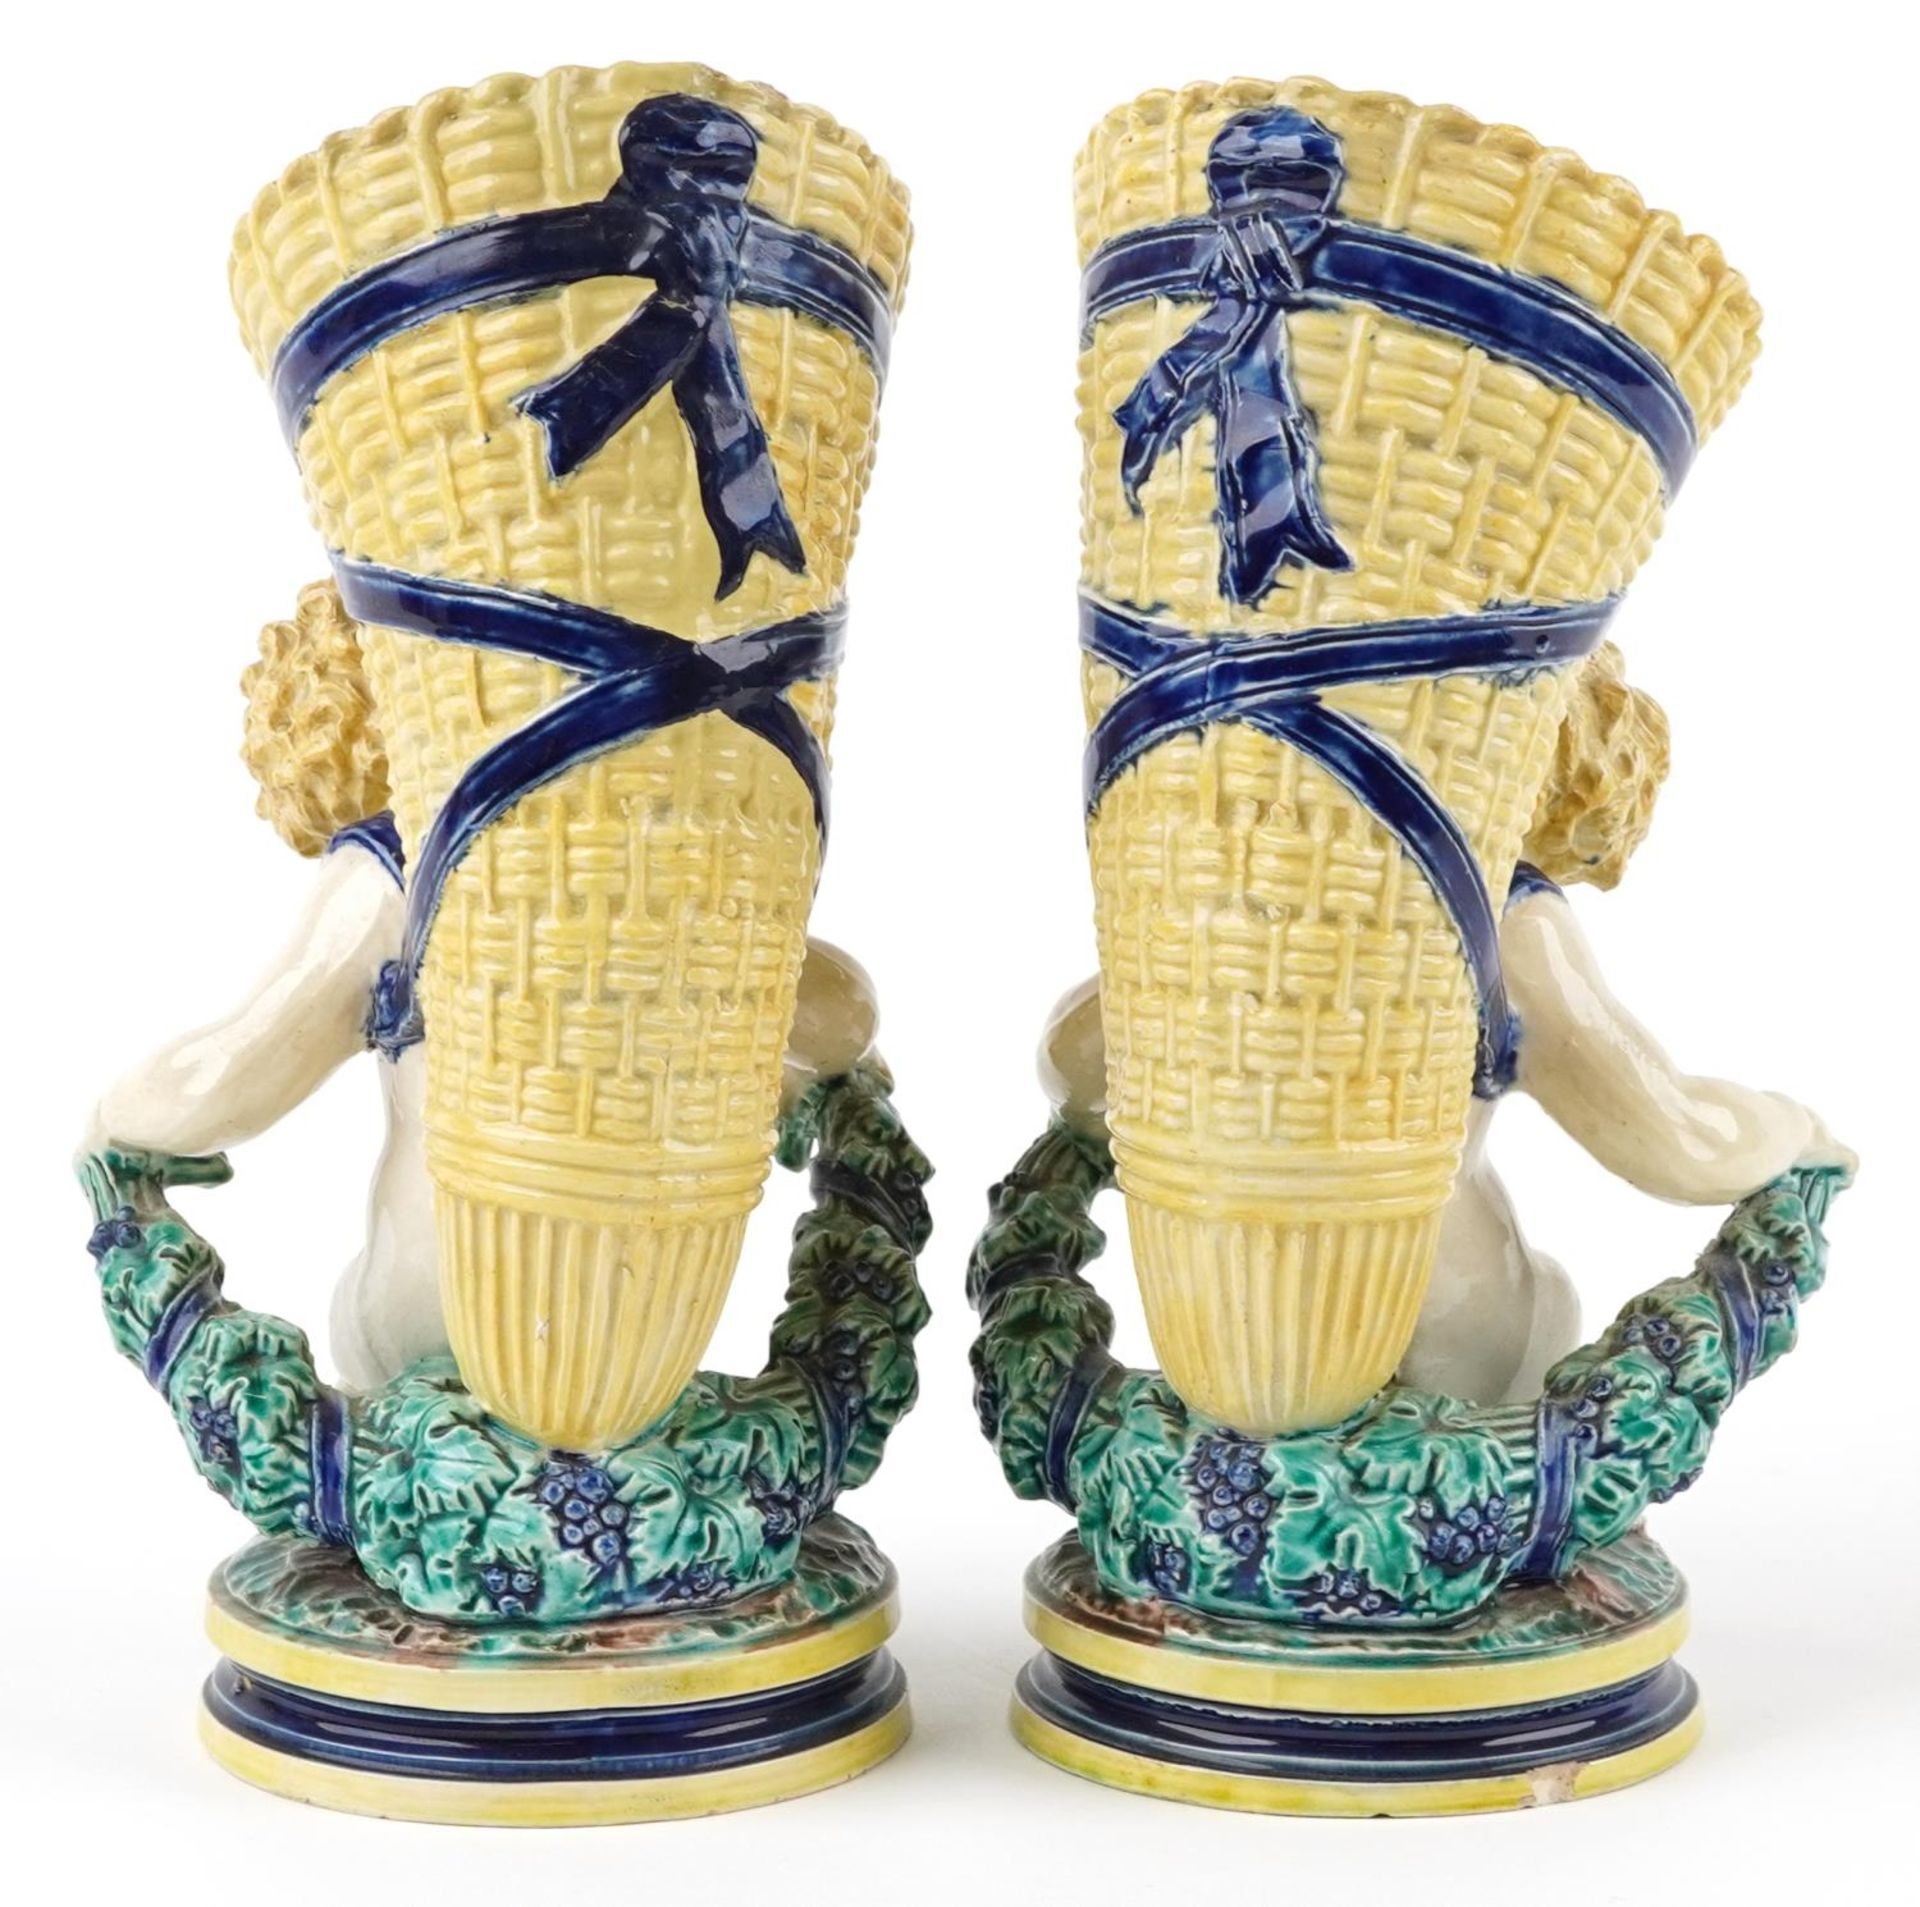 Pair of 19th century European Maiolica vases in the form of Putti carrying cornucopia, each with - Image 2 of 4